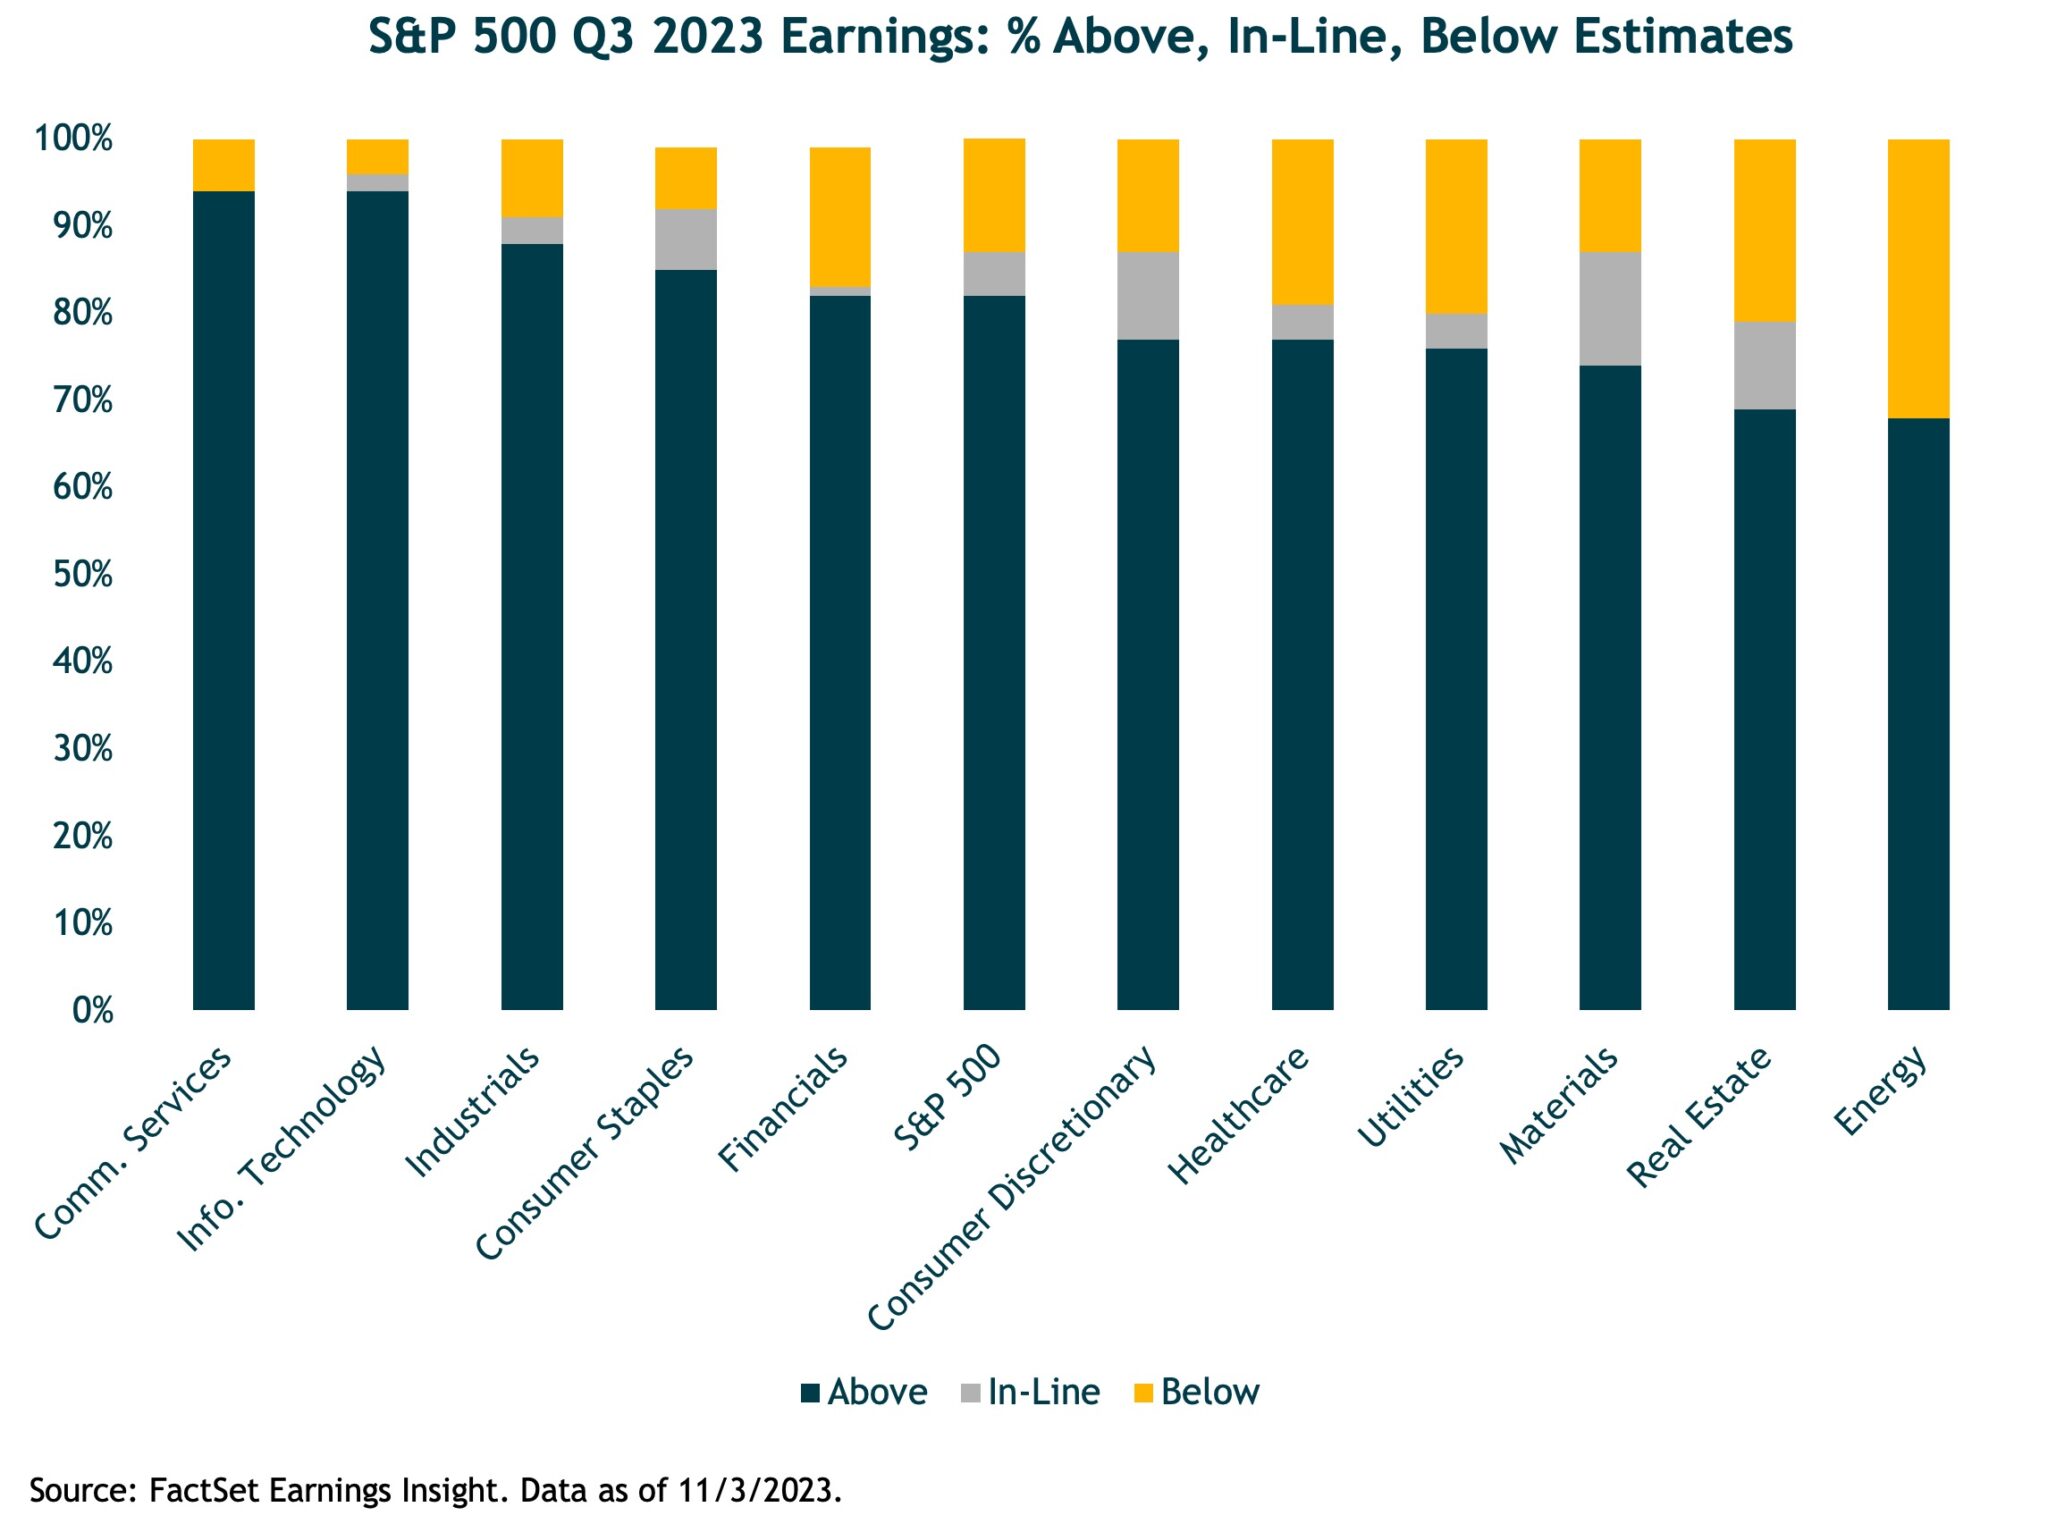 Chart showing S&P 500 Q3 2023 earnings